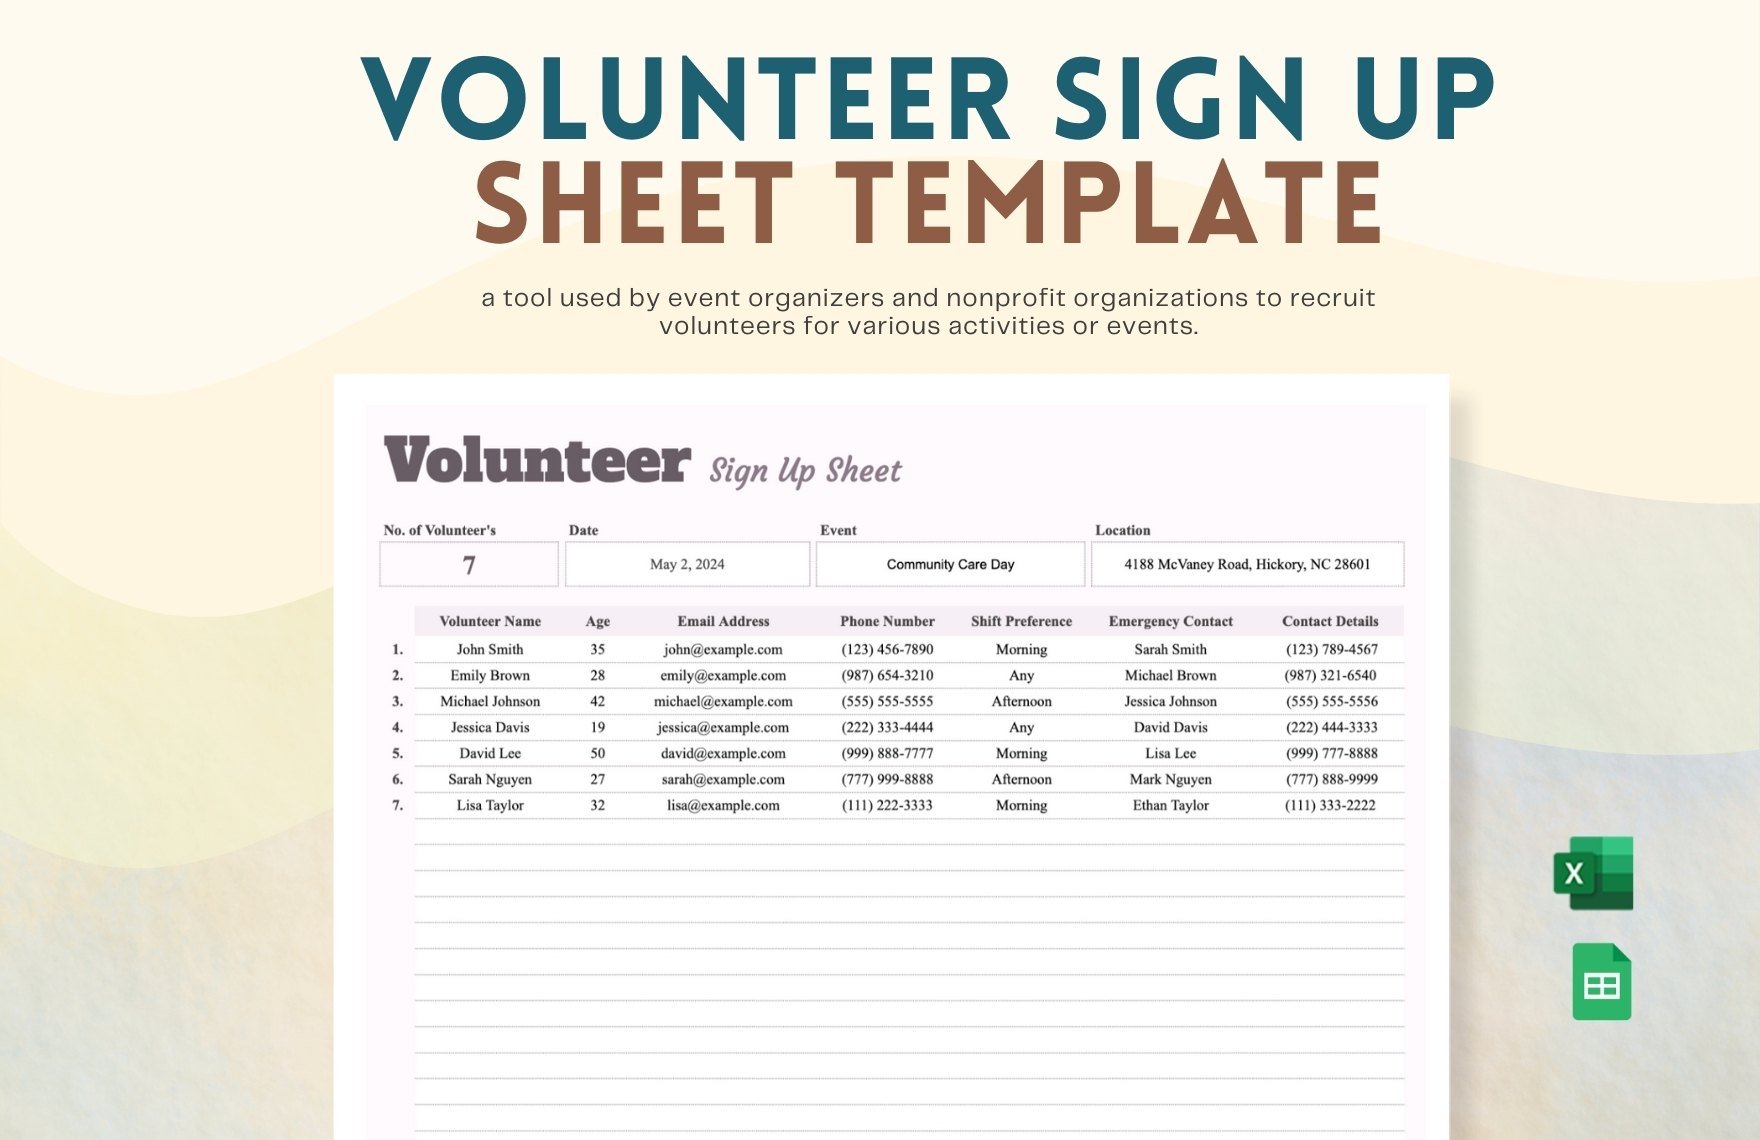 Free Volunteer Sign Up Sheet Template in Excel, Google Sheets